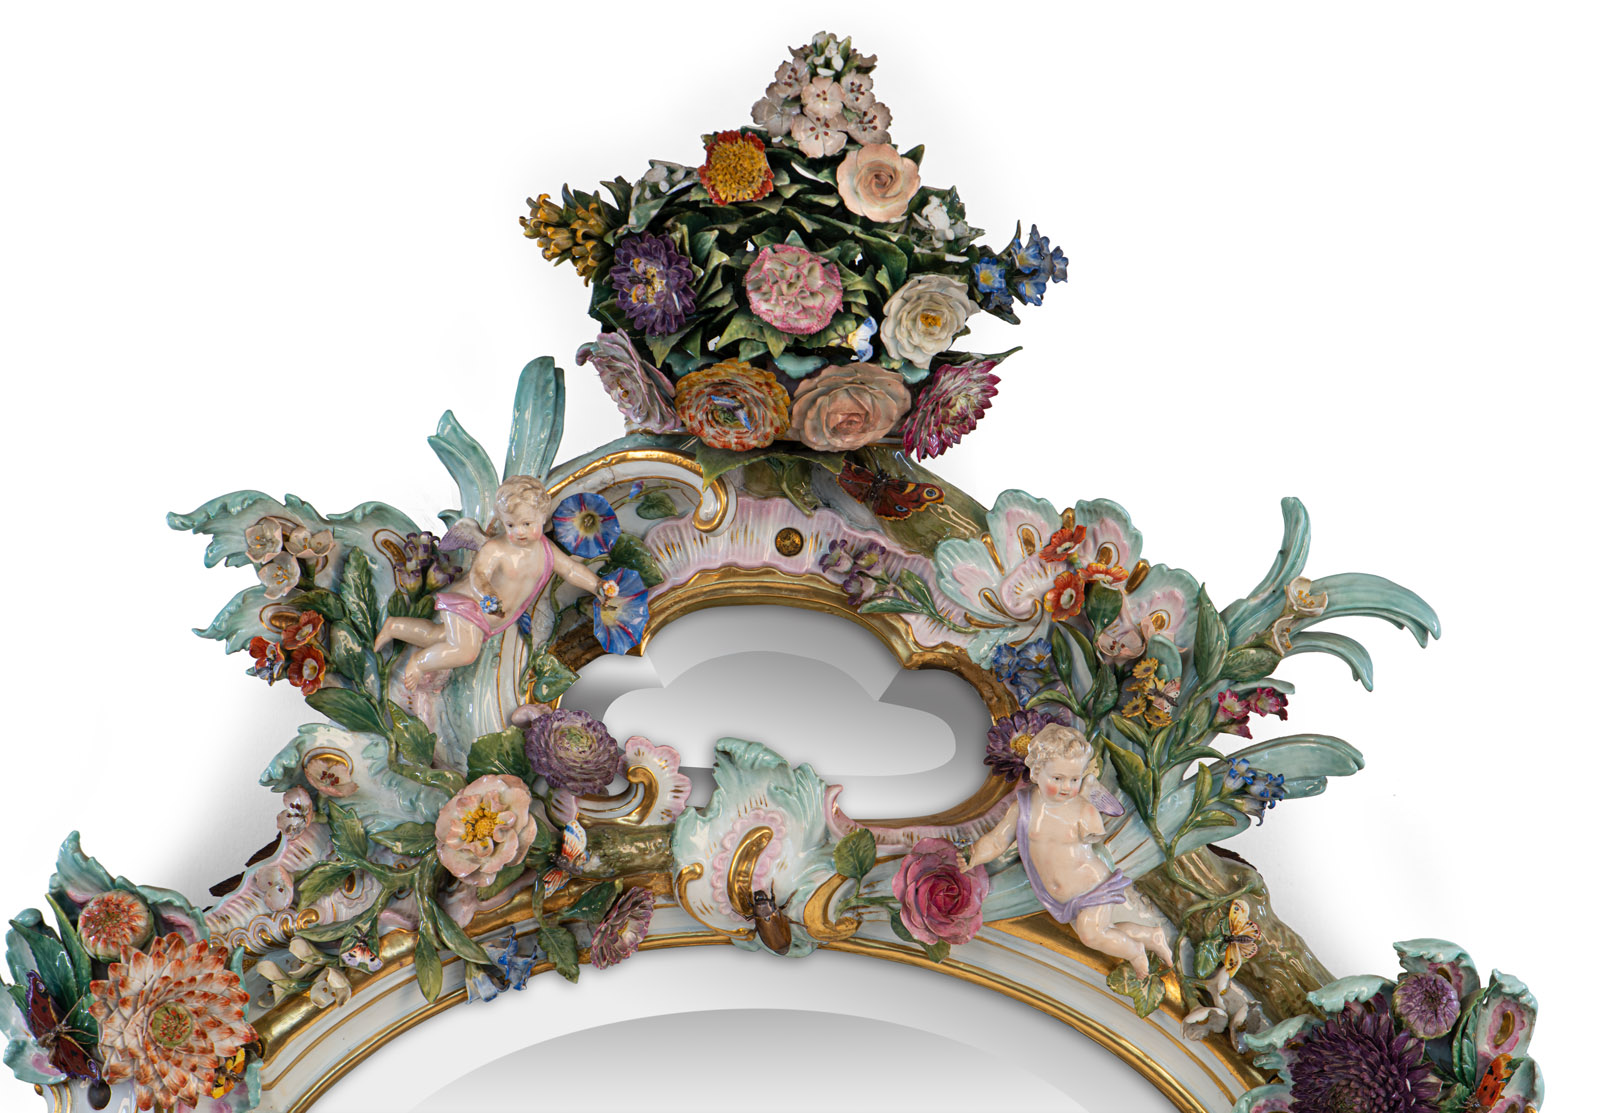 A LARGE ROCOCO STYLE MEISSEN PORCELAIN WALL MIRROR - Image 3 of 11